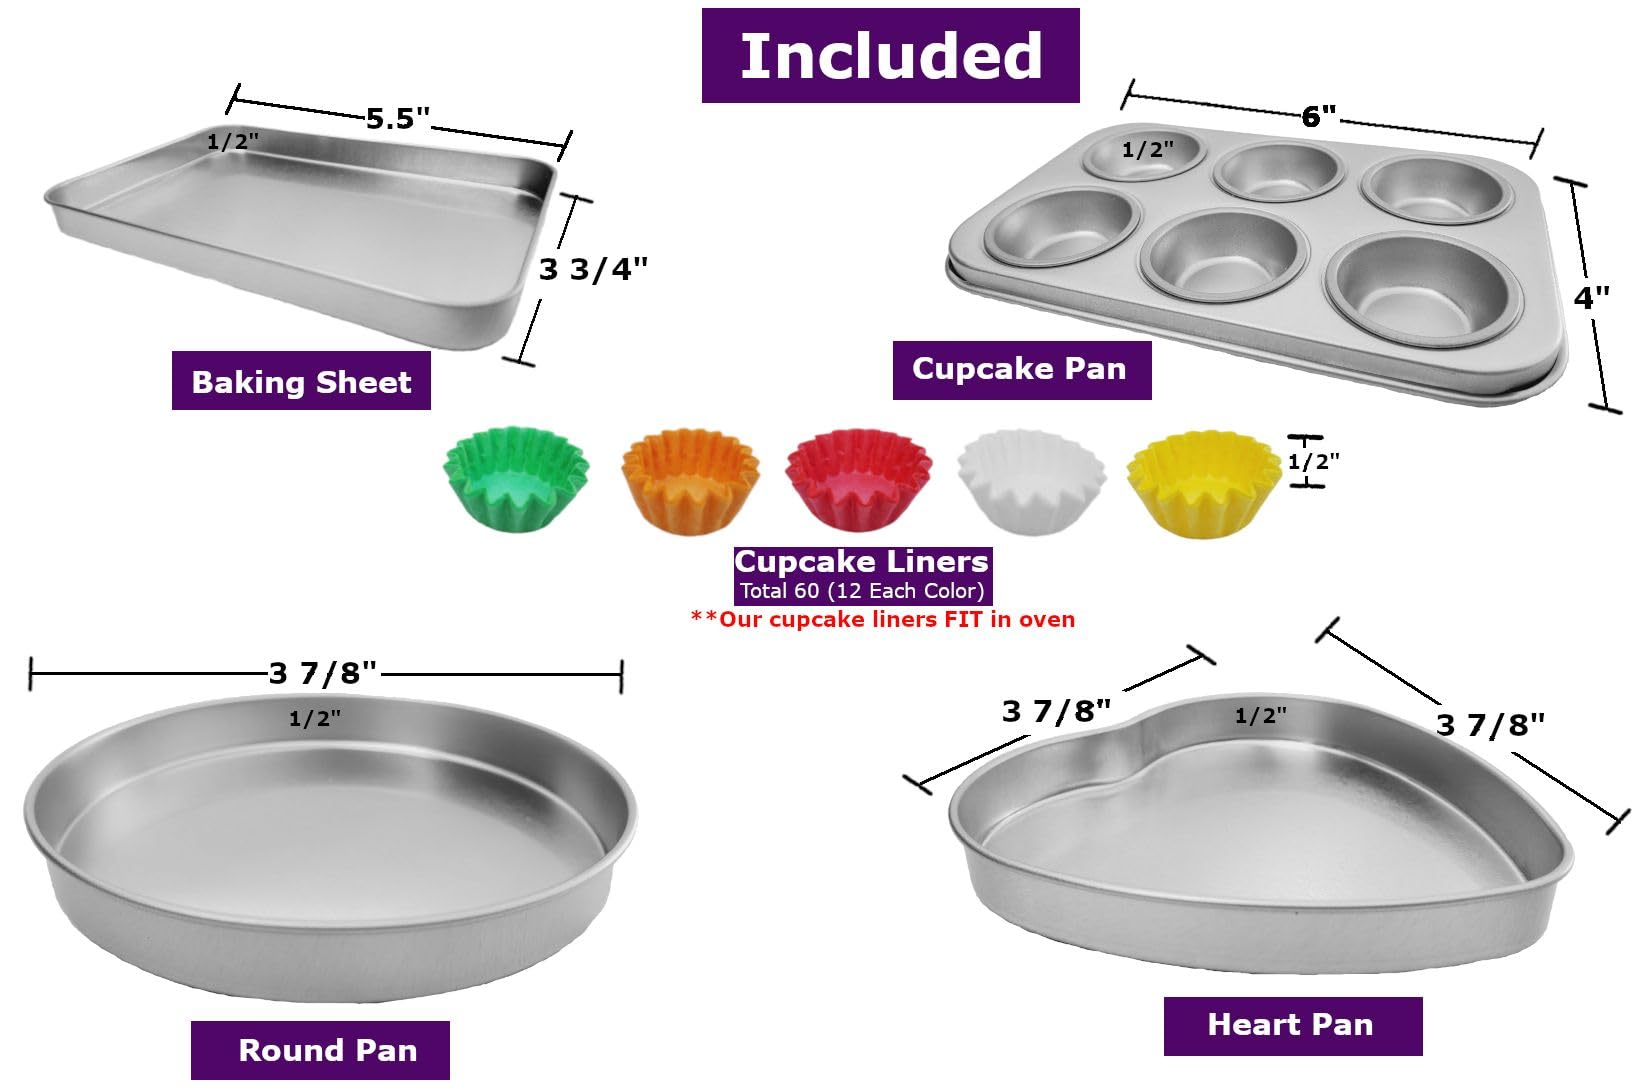 Quadrapoint Deluxe Pan Set Compatible with Easy Bake Ultimate Oven | Includes 60 Cupcake Liners THAT WILL FIT, UNLIKE OTHERS!!